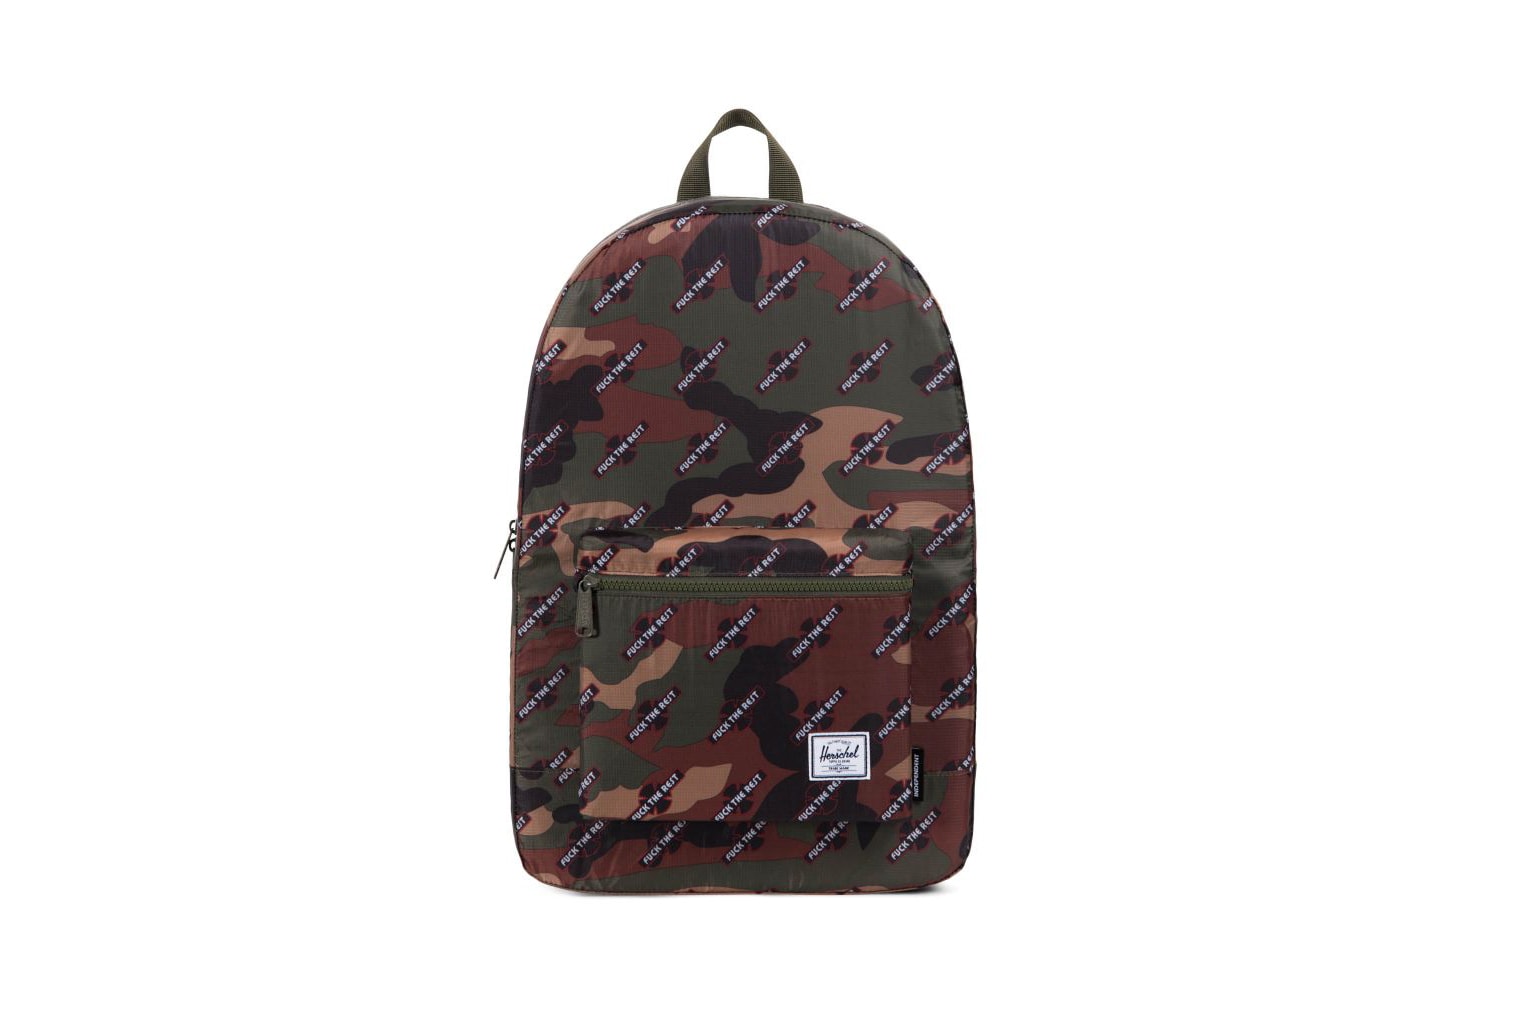 Herschel Supply Co. Independent Truck Company Fuck The Rest Collection Bags Fall Winter 2017